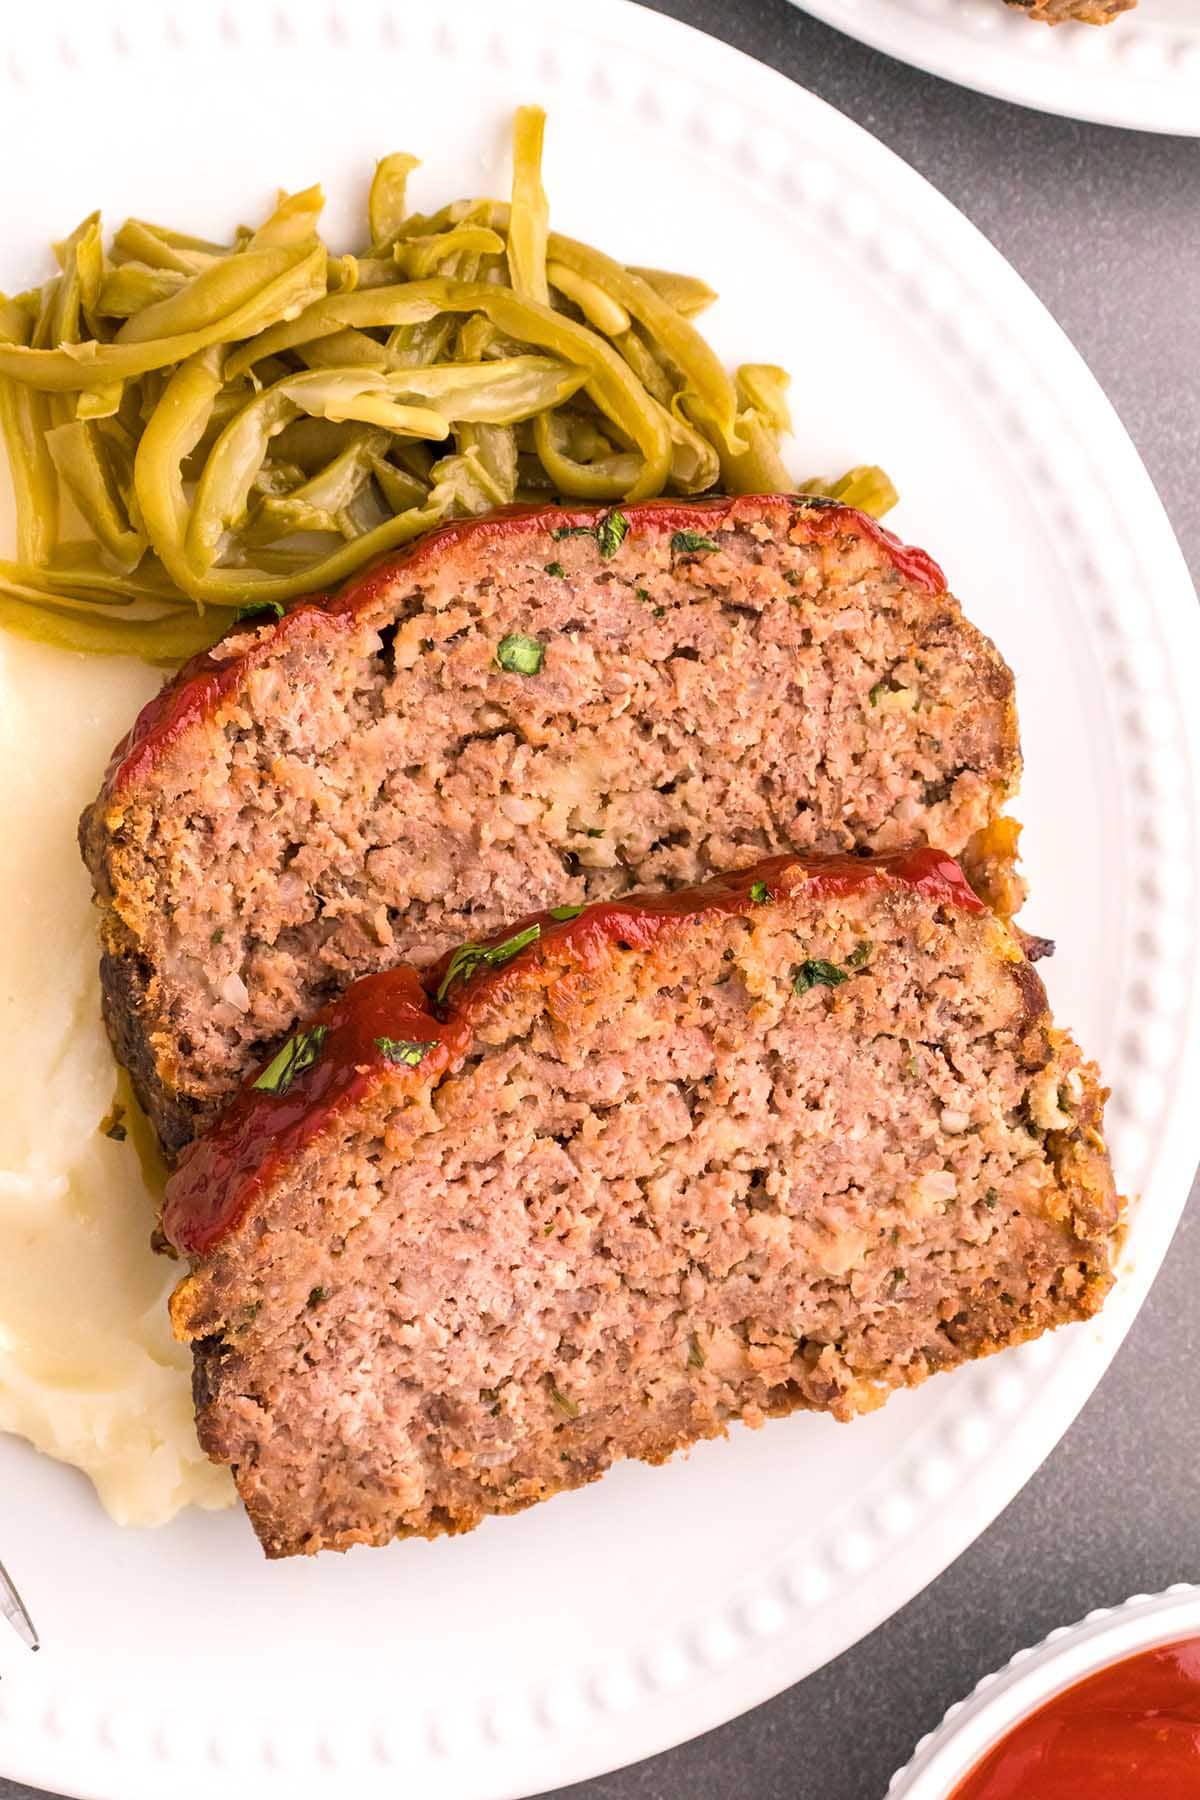 2 slices of Meatloaf on a plate